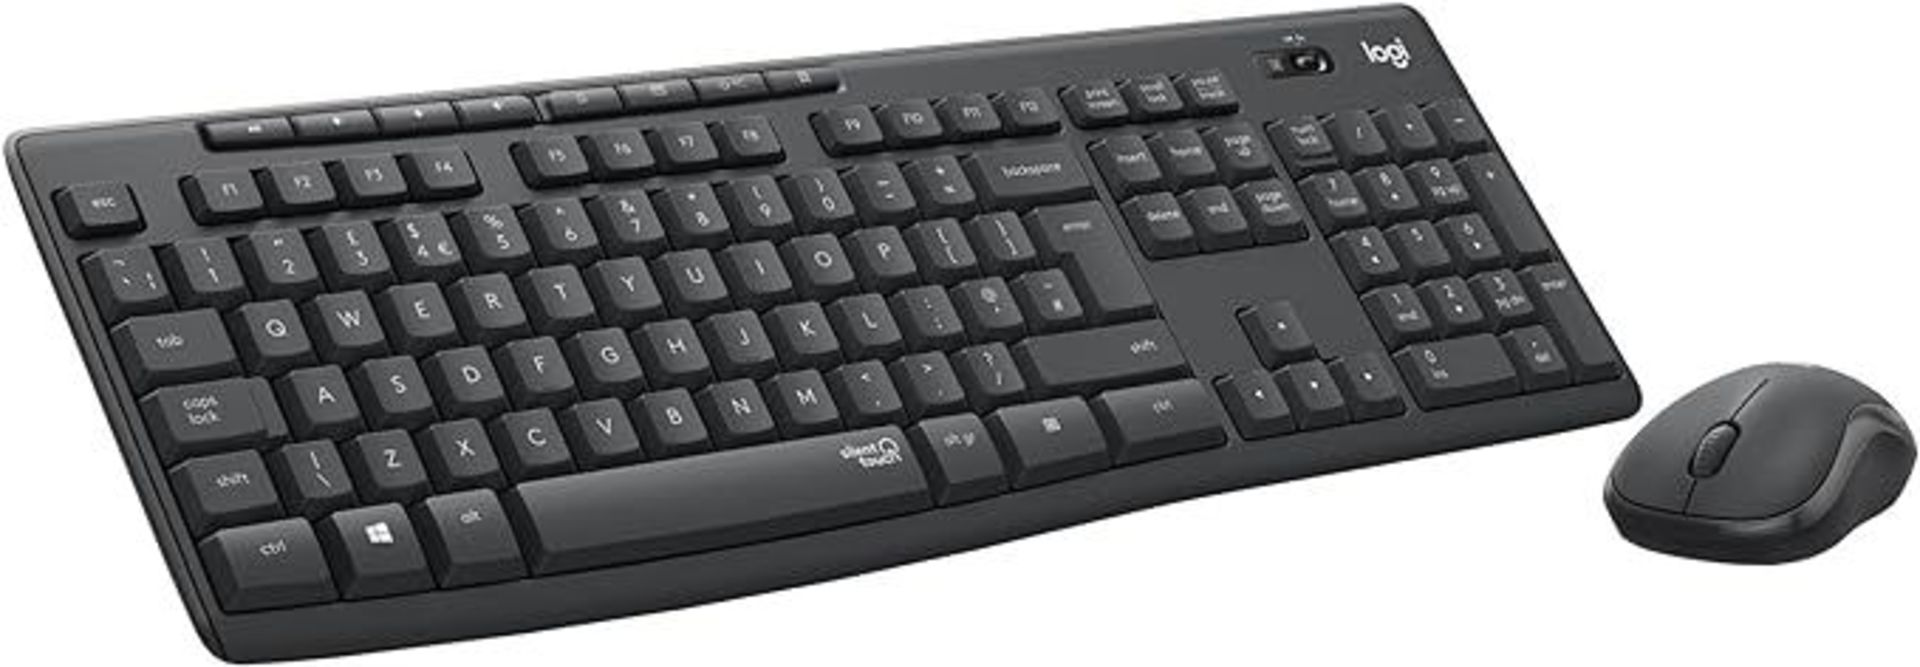 Logitech MK295 Silent Wireless Mouse & Keyboard Combo with SilentTouch Technology, Full Numpad,